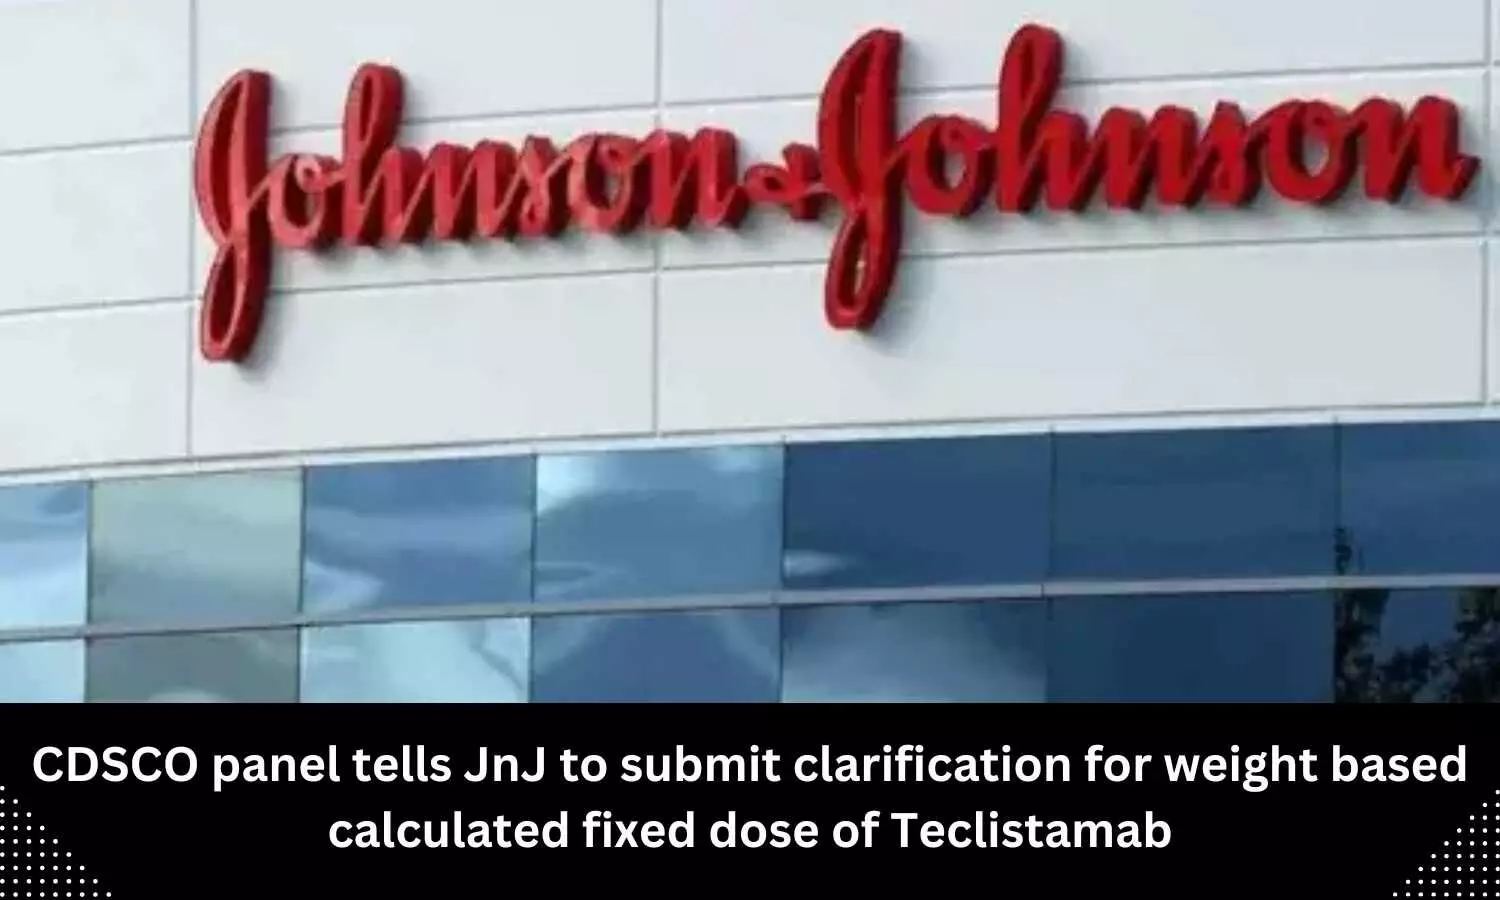 CDSCO panel tells JnJ to submit clarification for weight based calculated fixed dose of Teclistamab